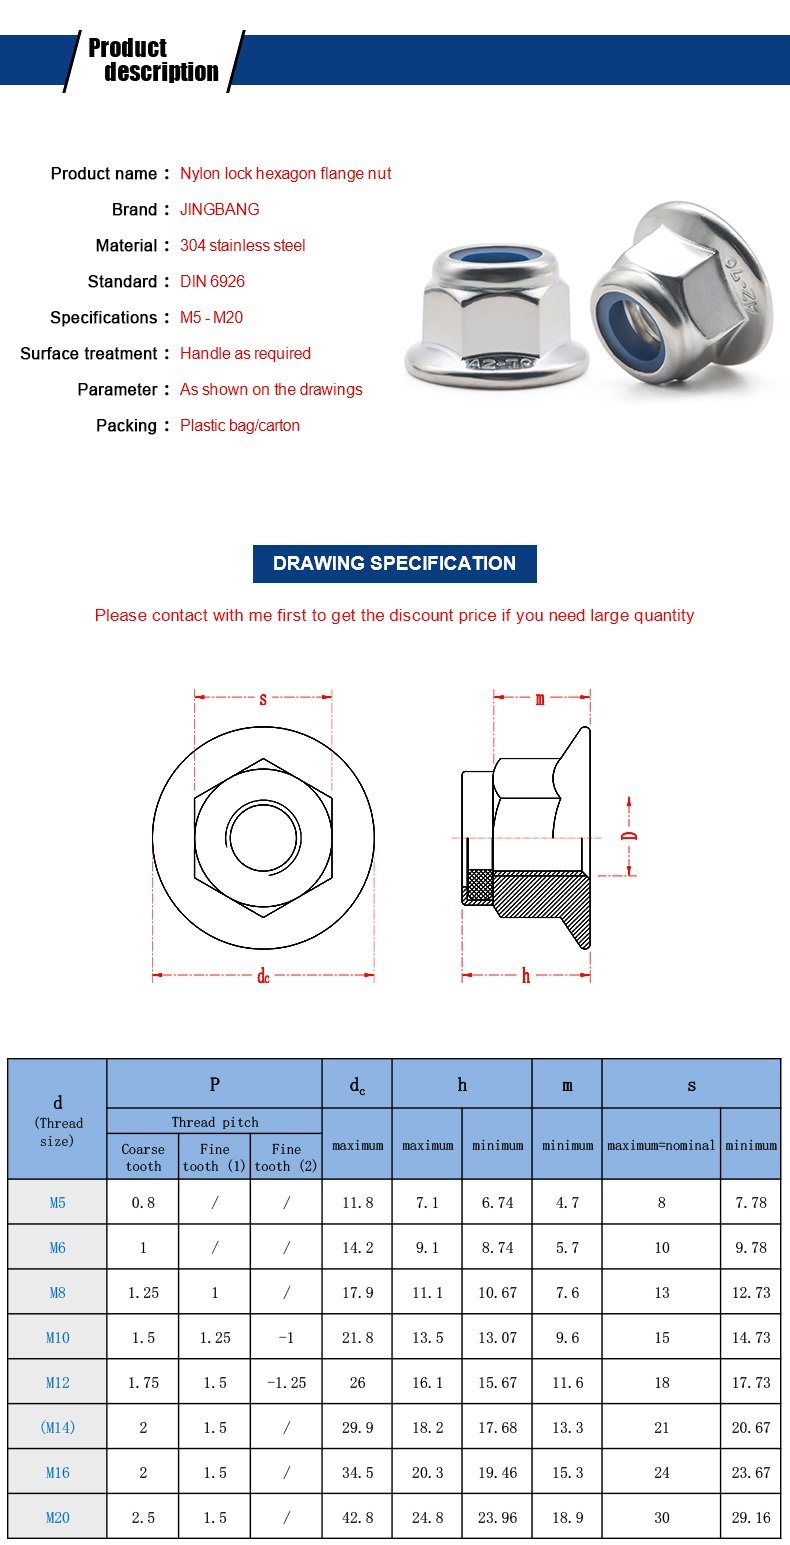 A4-70 Stainless Steel HEX Flange Nylon Lock Nuts